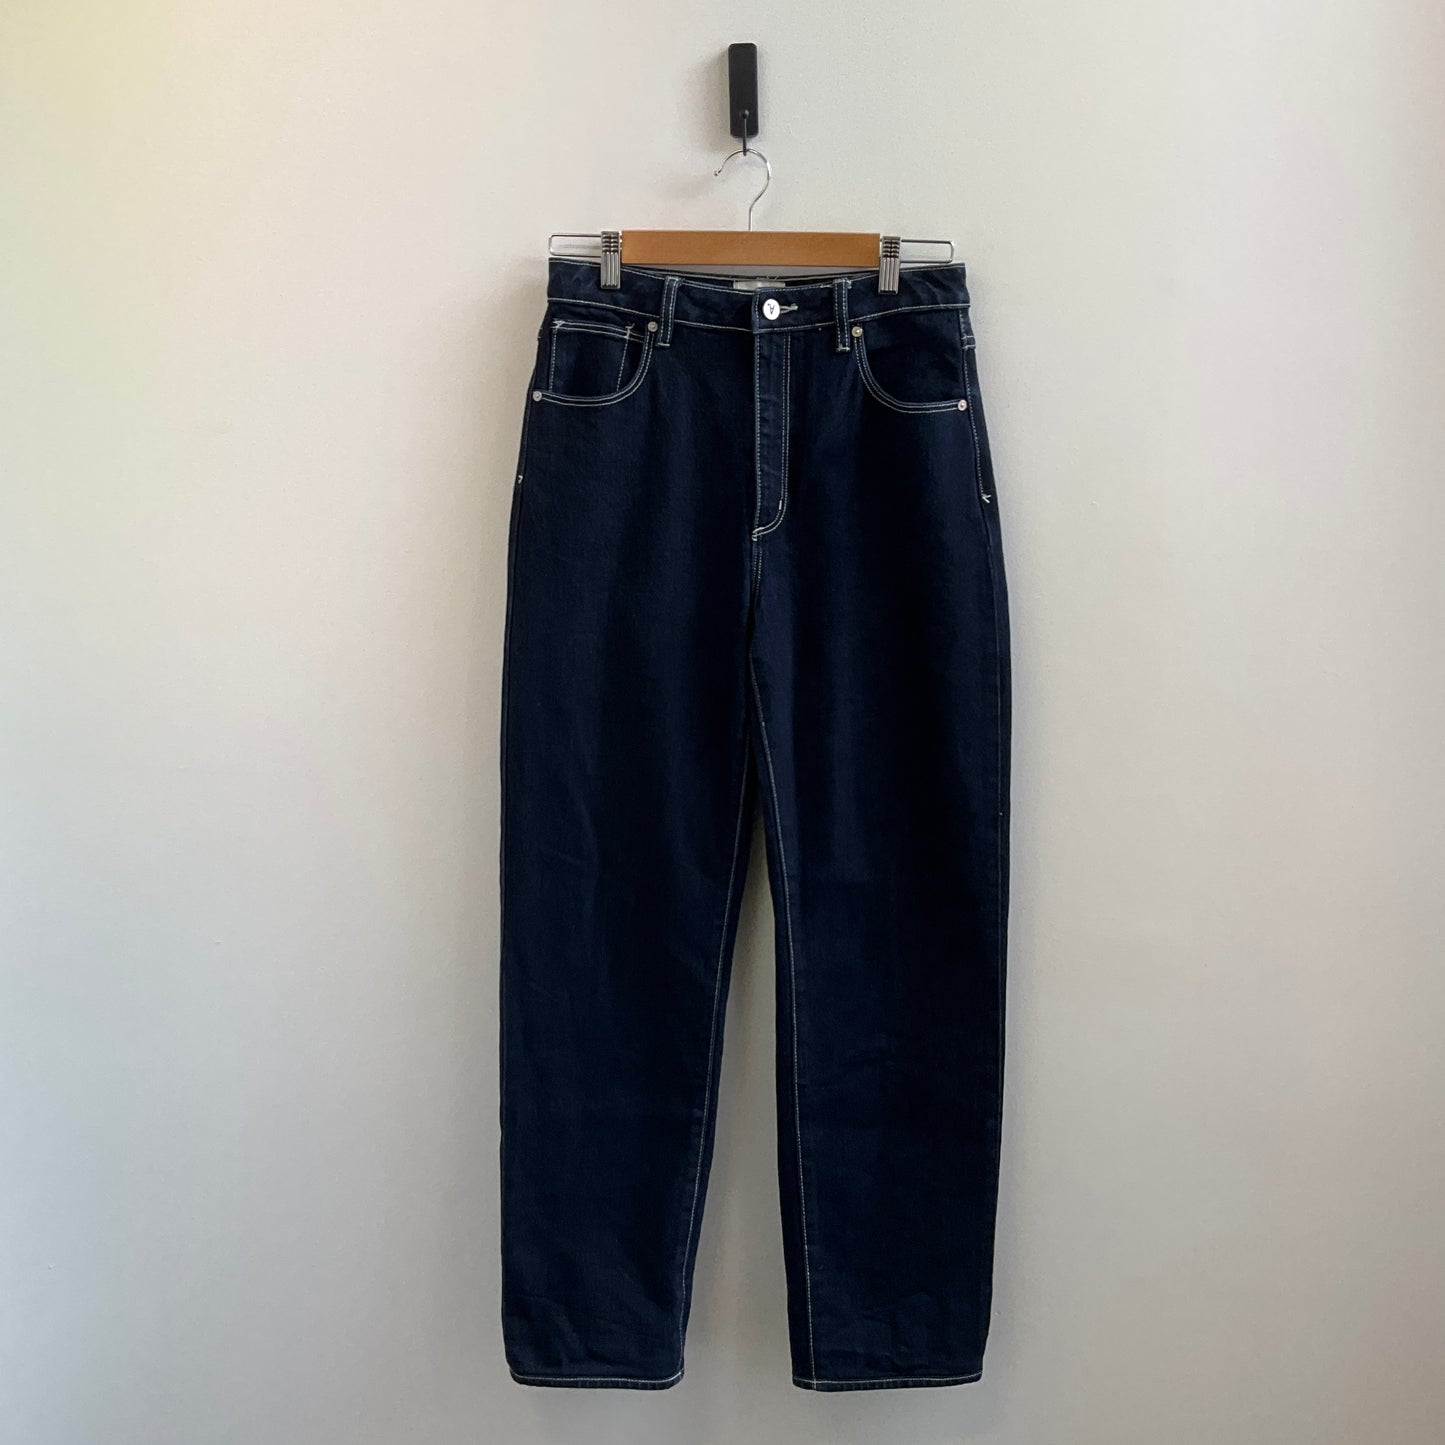 Abrand - Navy Blue Jeans